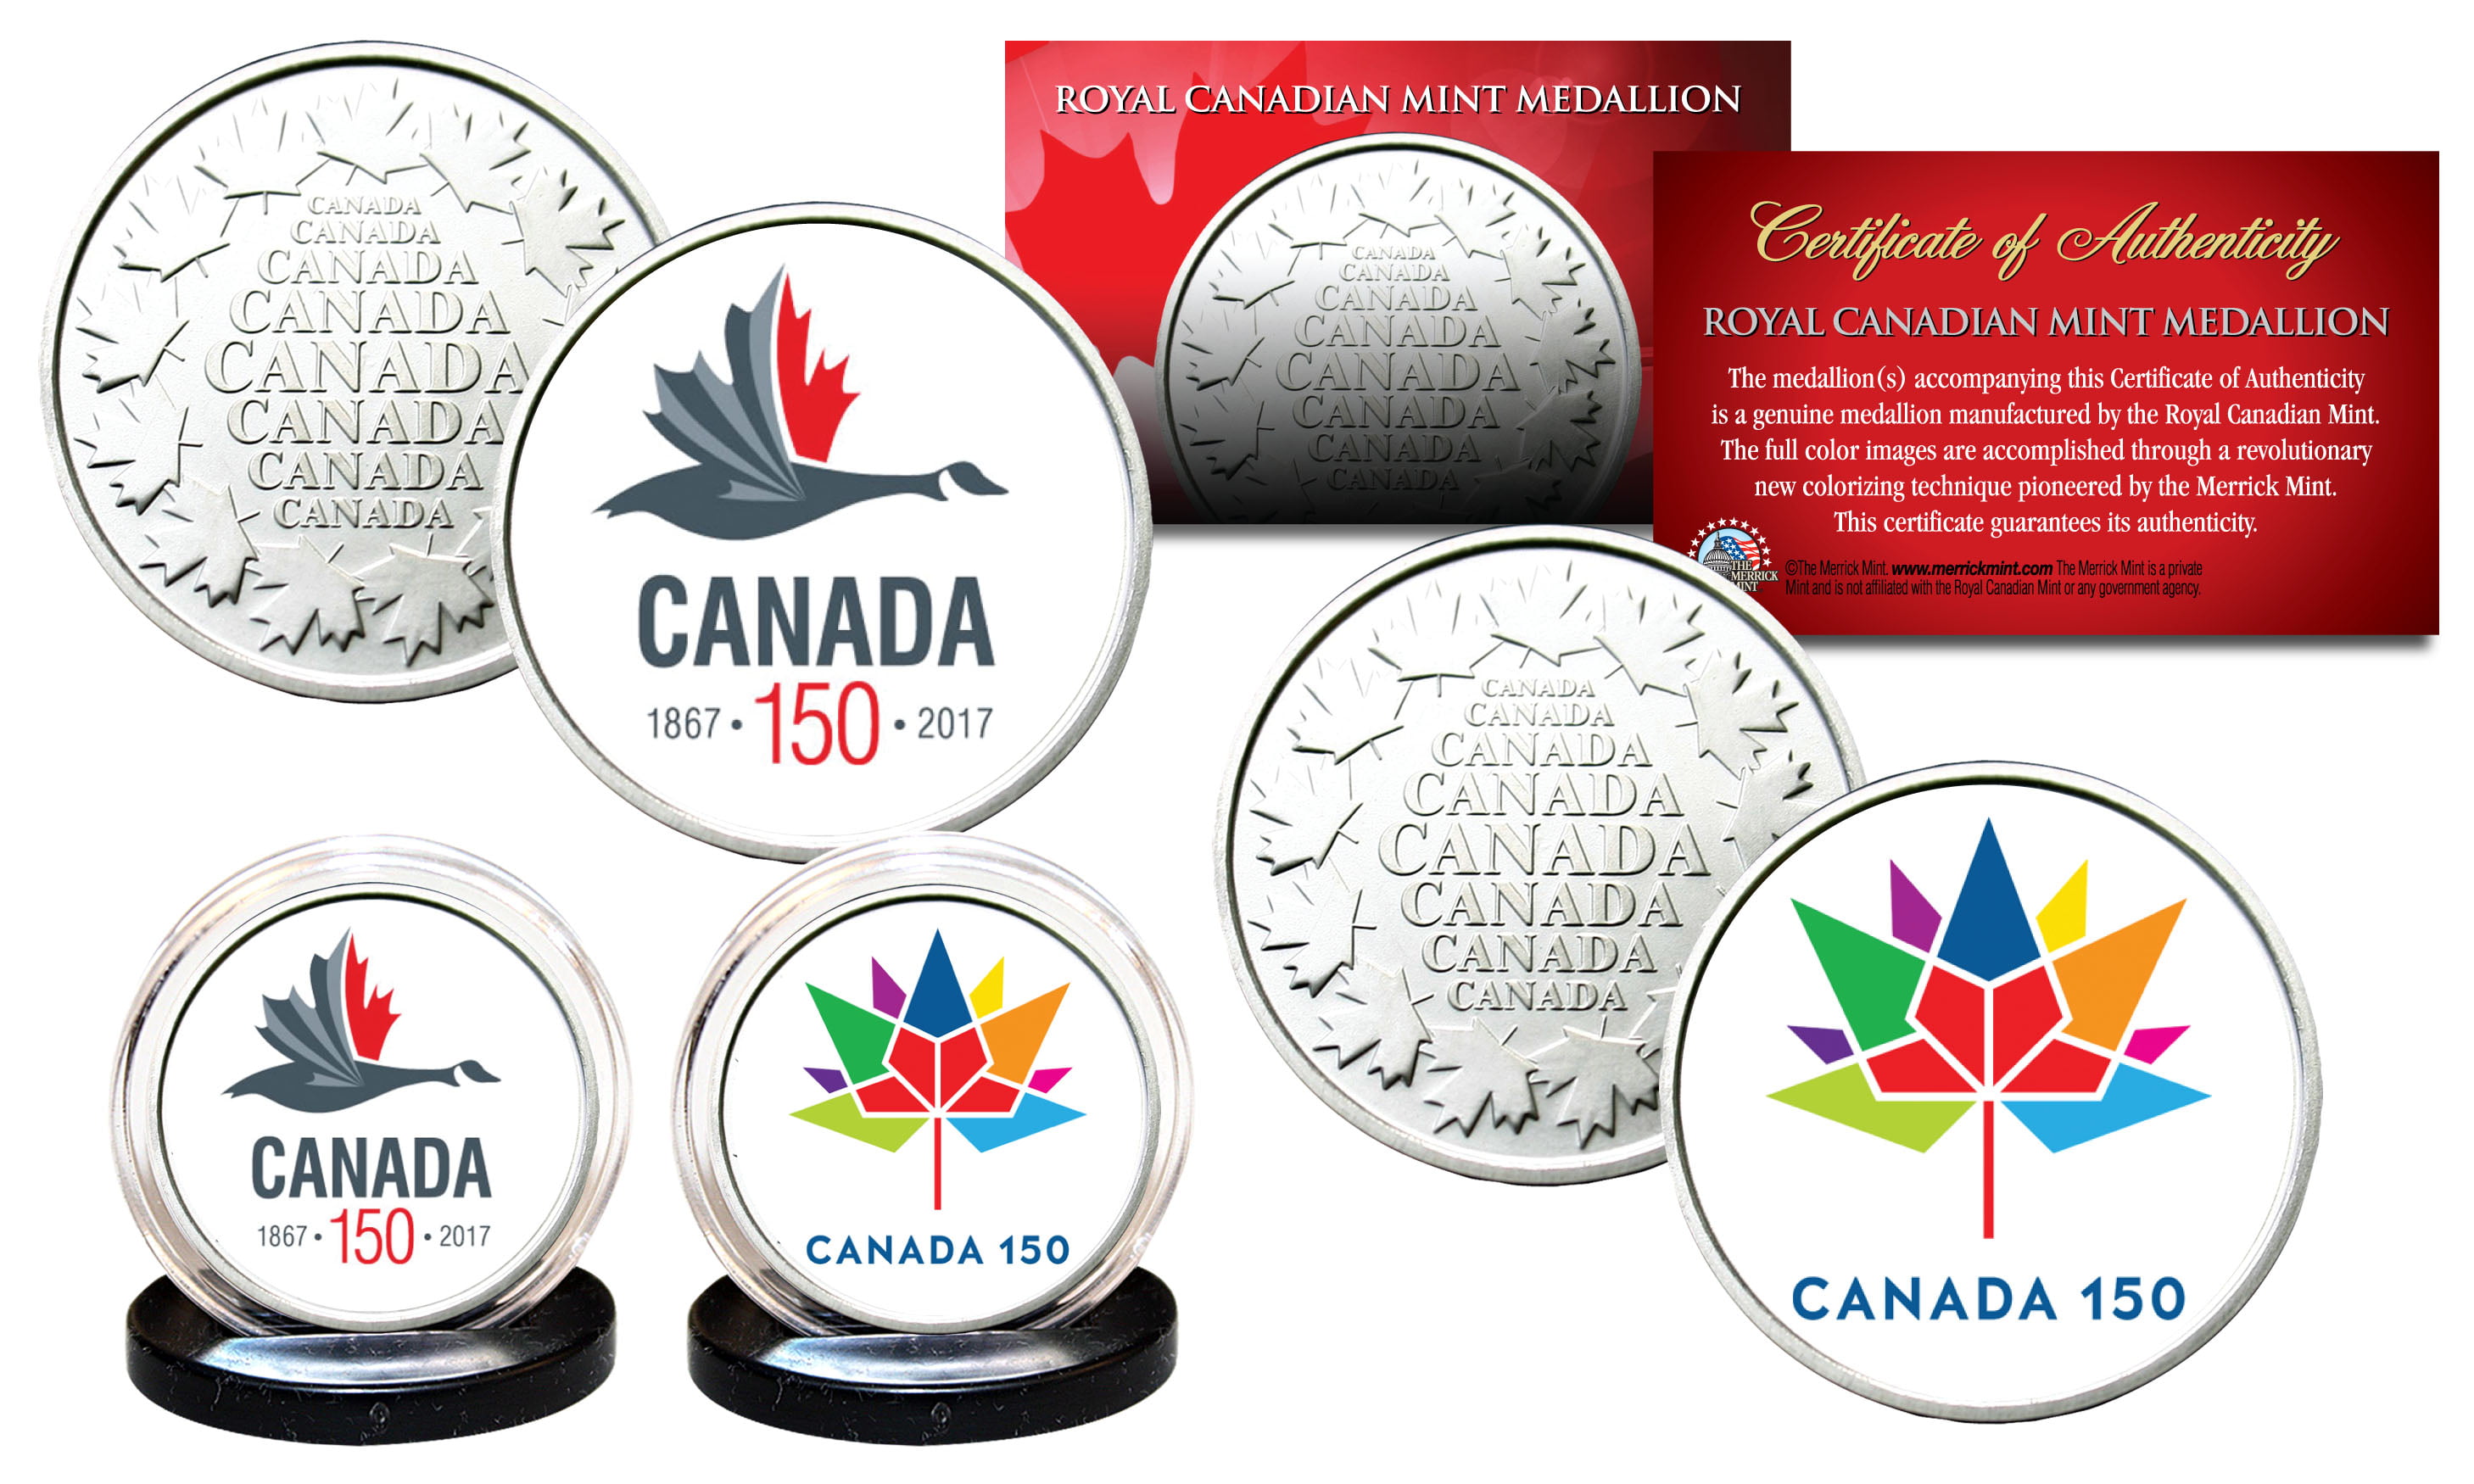 ROYAL BABY SUSSEX ARCHIE Prince Harry & Meghan Markle RCM Canada 2-Coin Set 